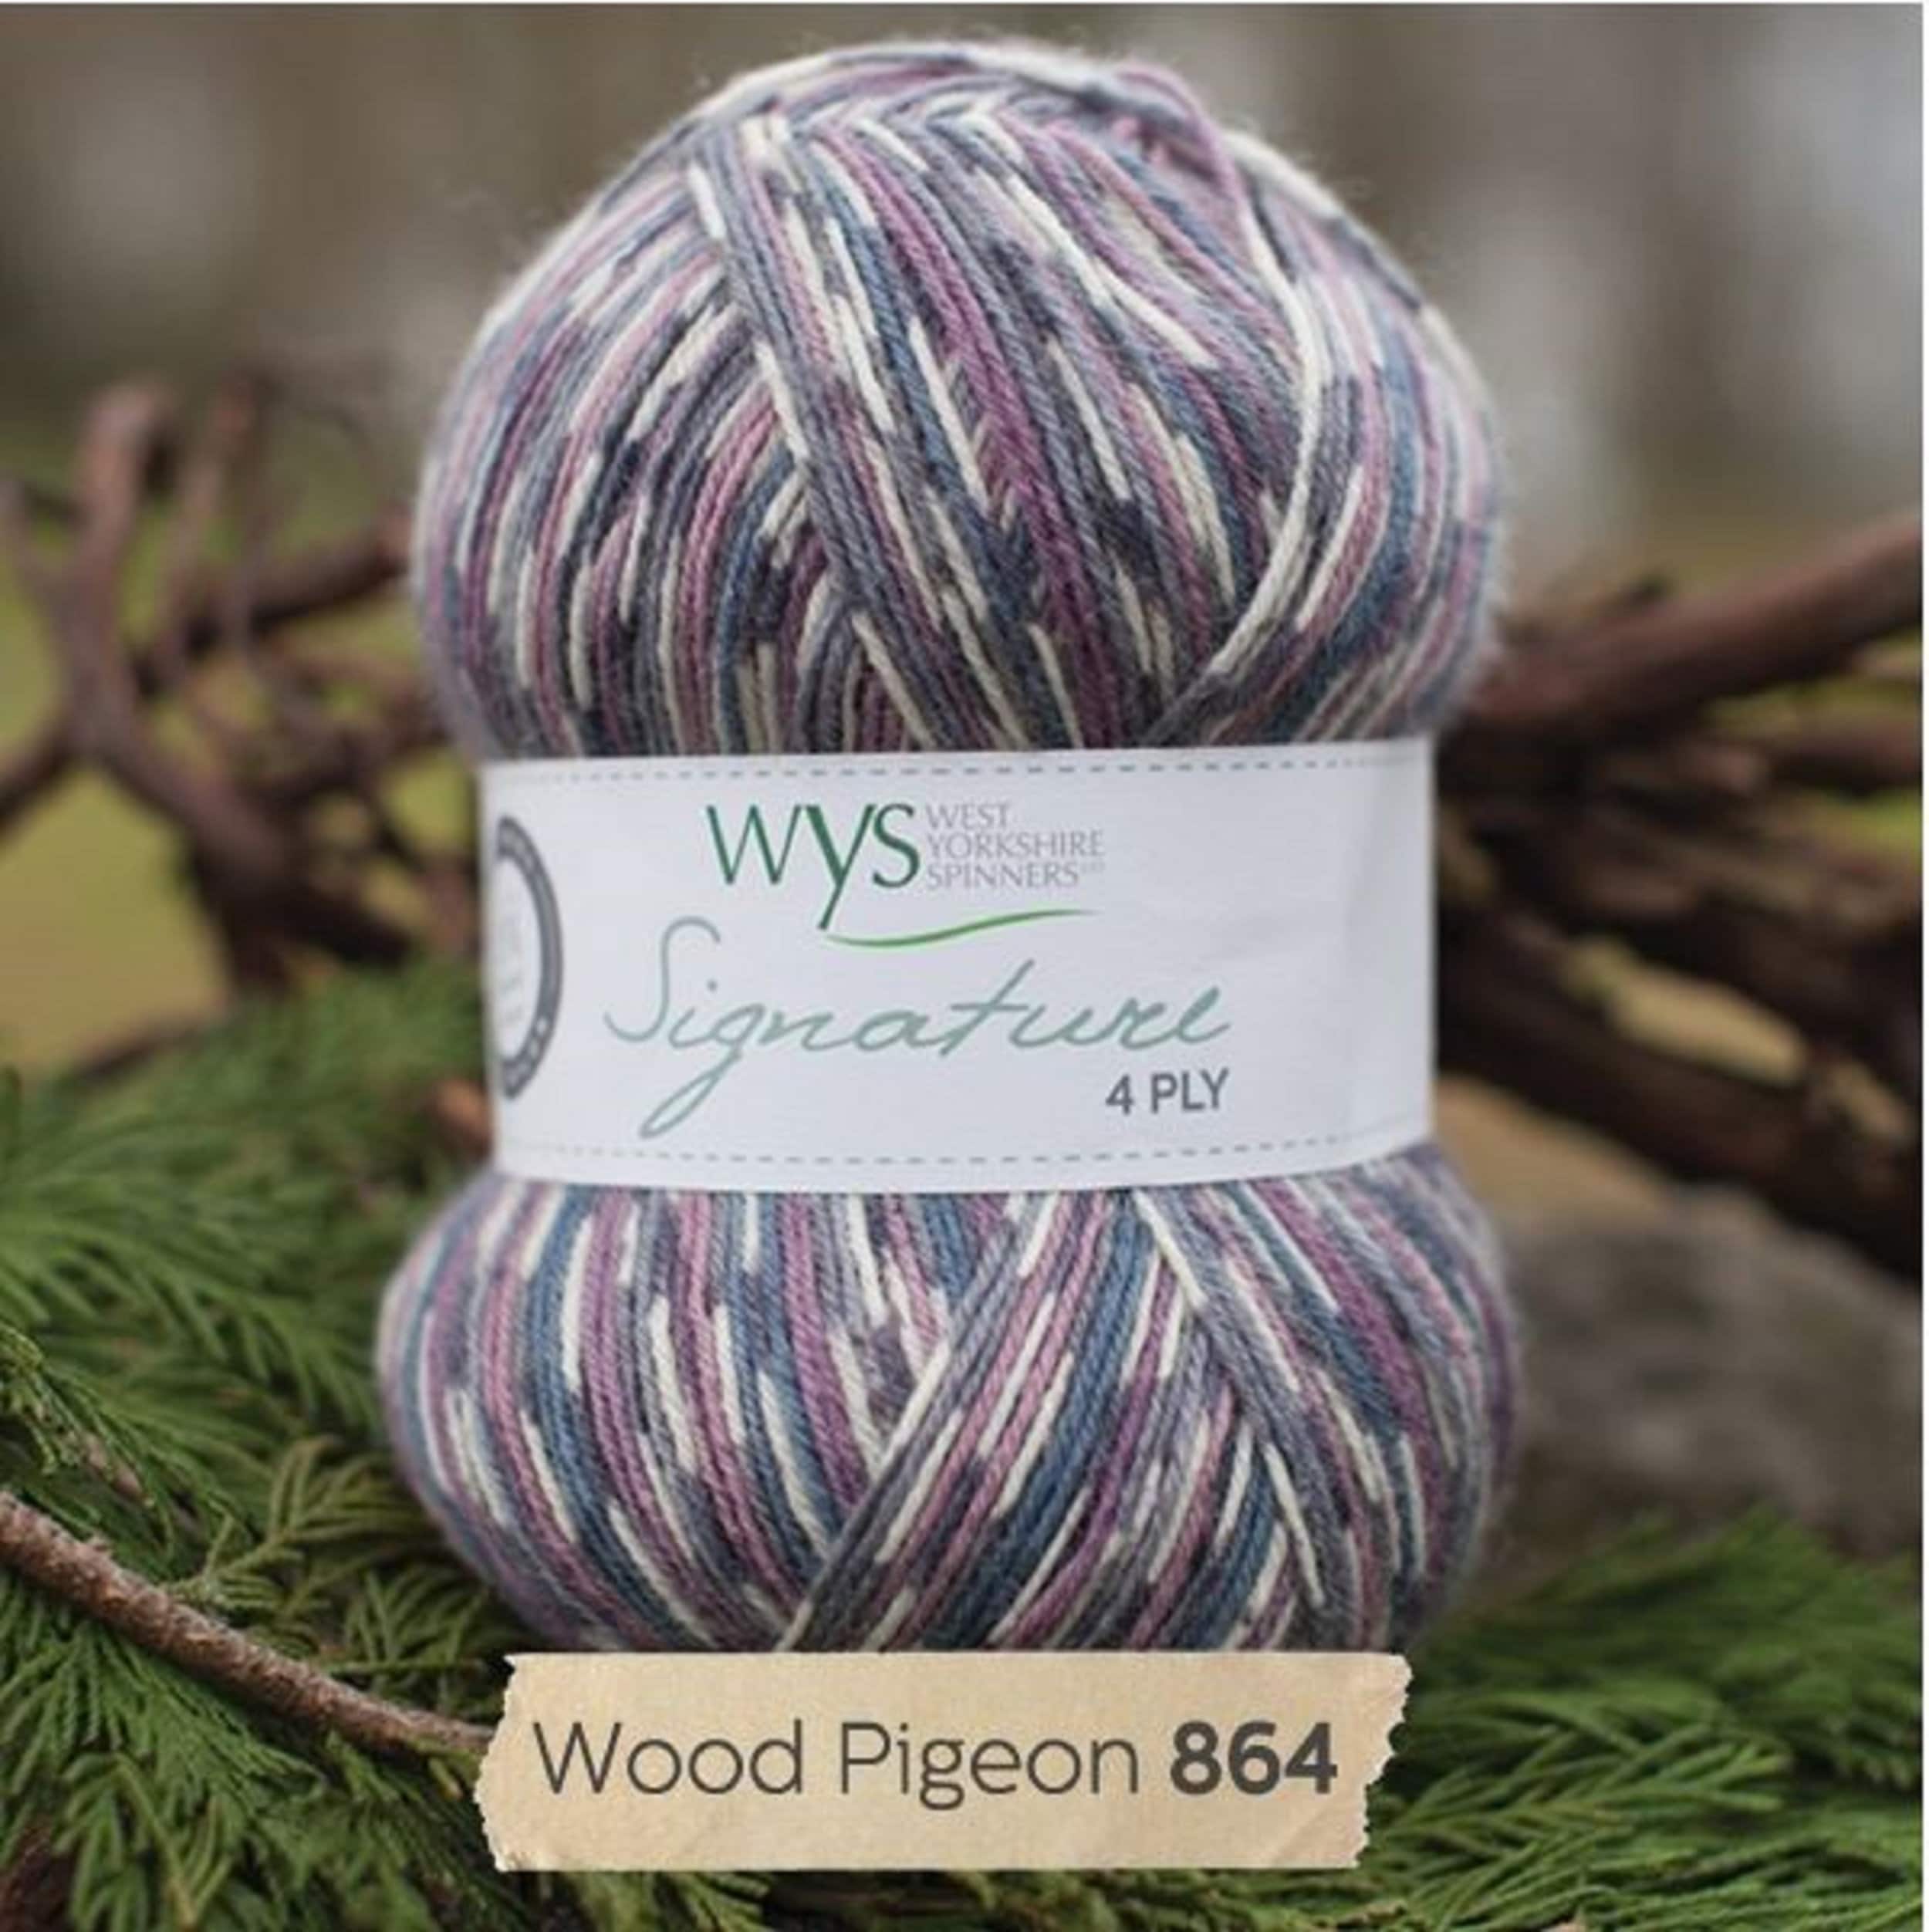 West Yorkshire Spinners Signature 4 Ply - Blue Tit (818)